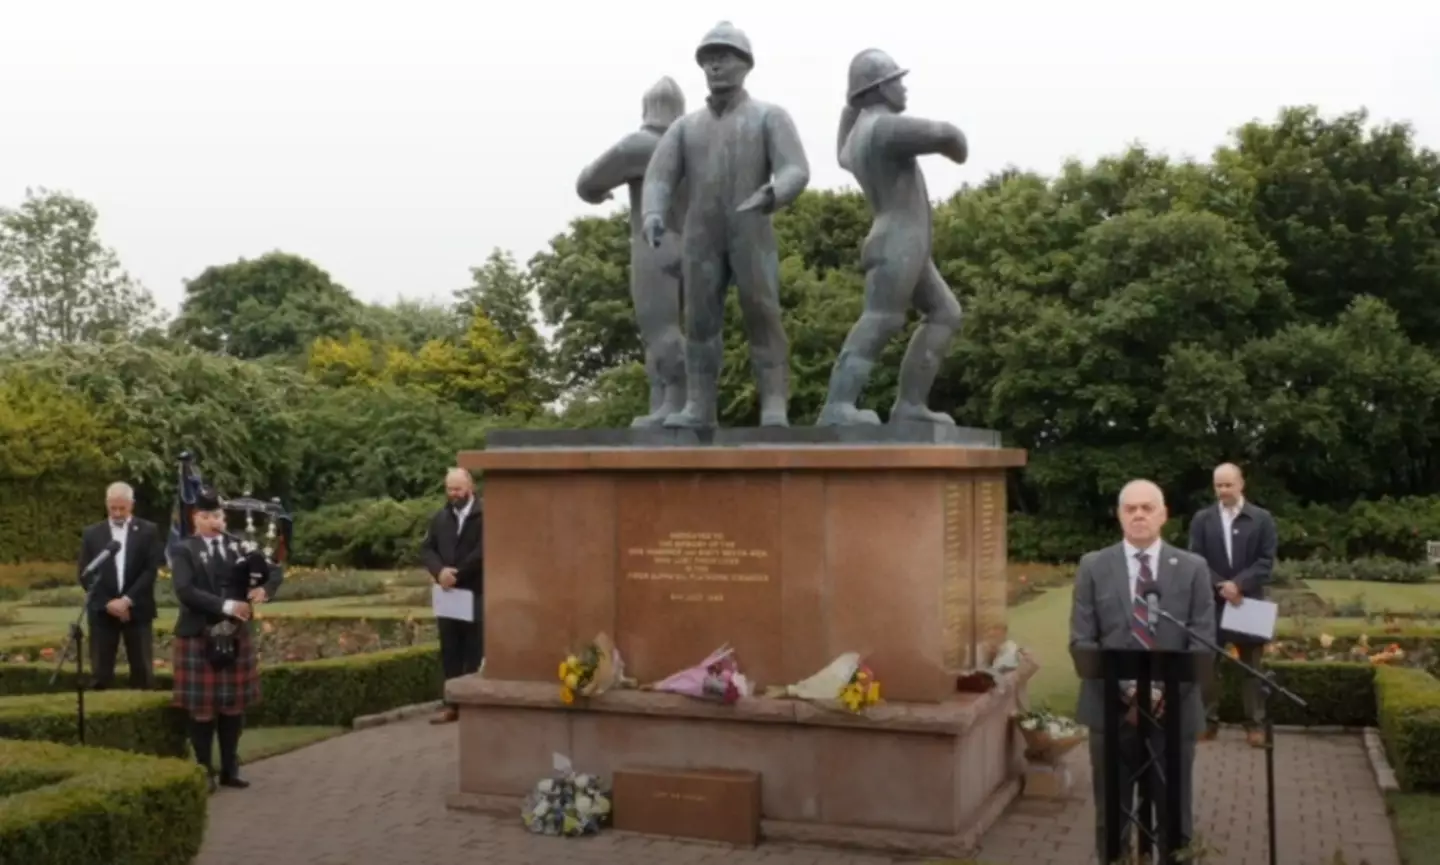 The memorial dedicated to the men of the Piper Alpha disaster, set up in Aberdeen.